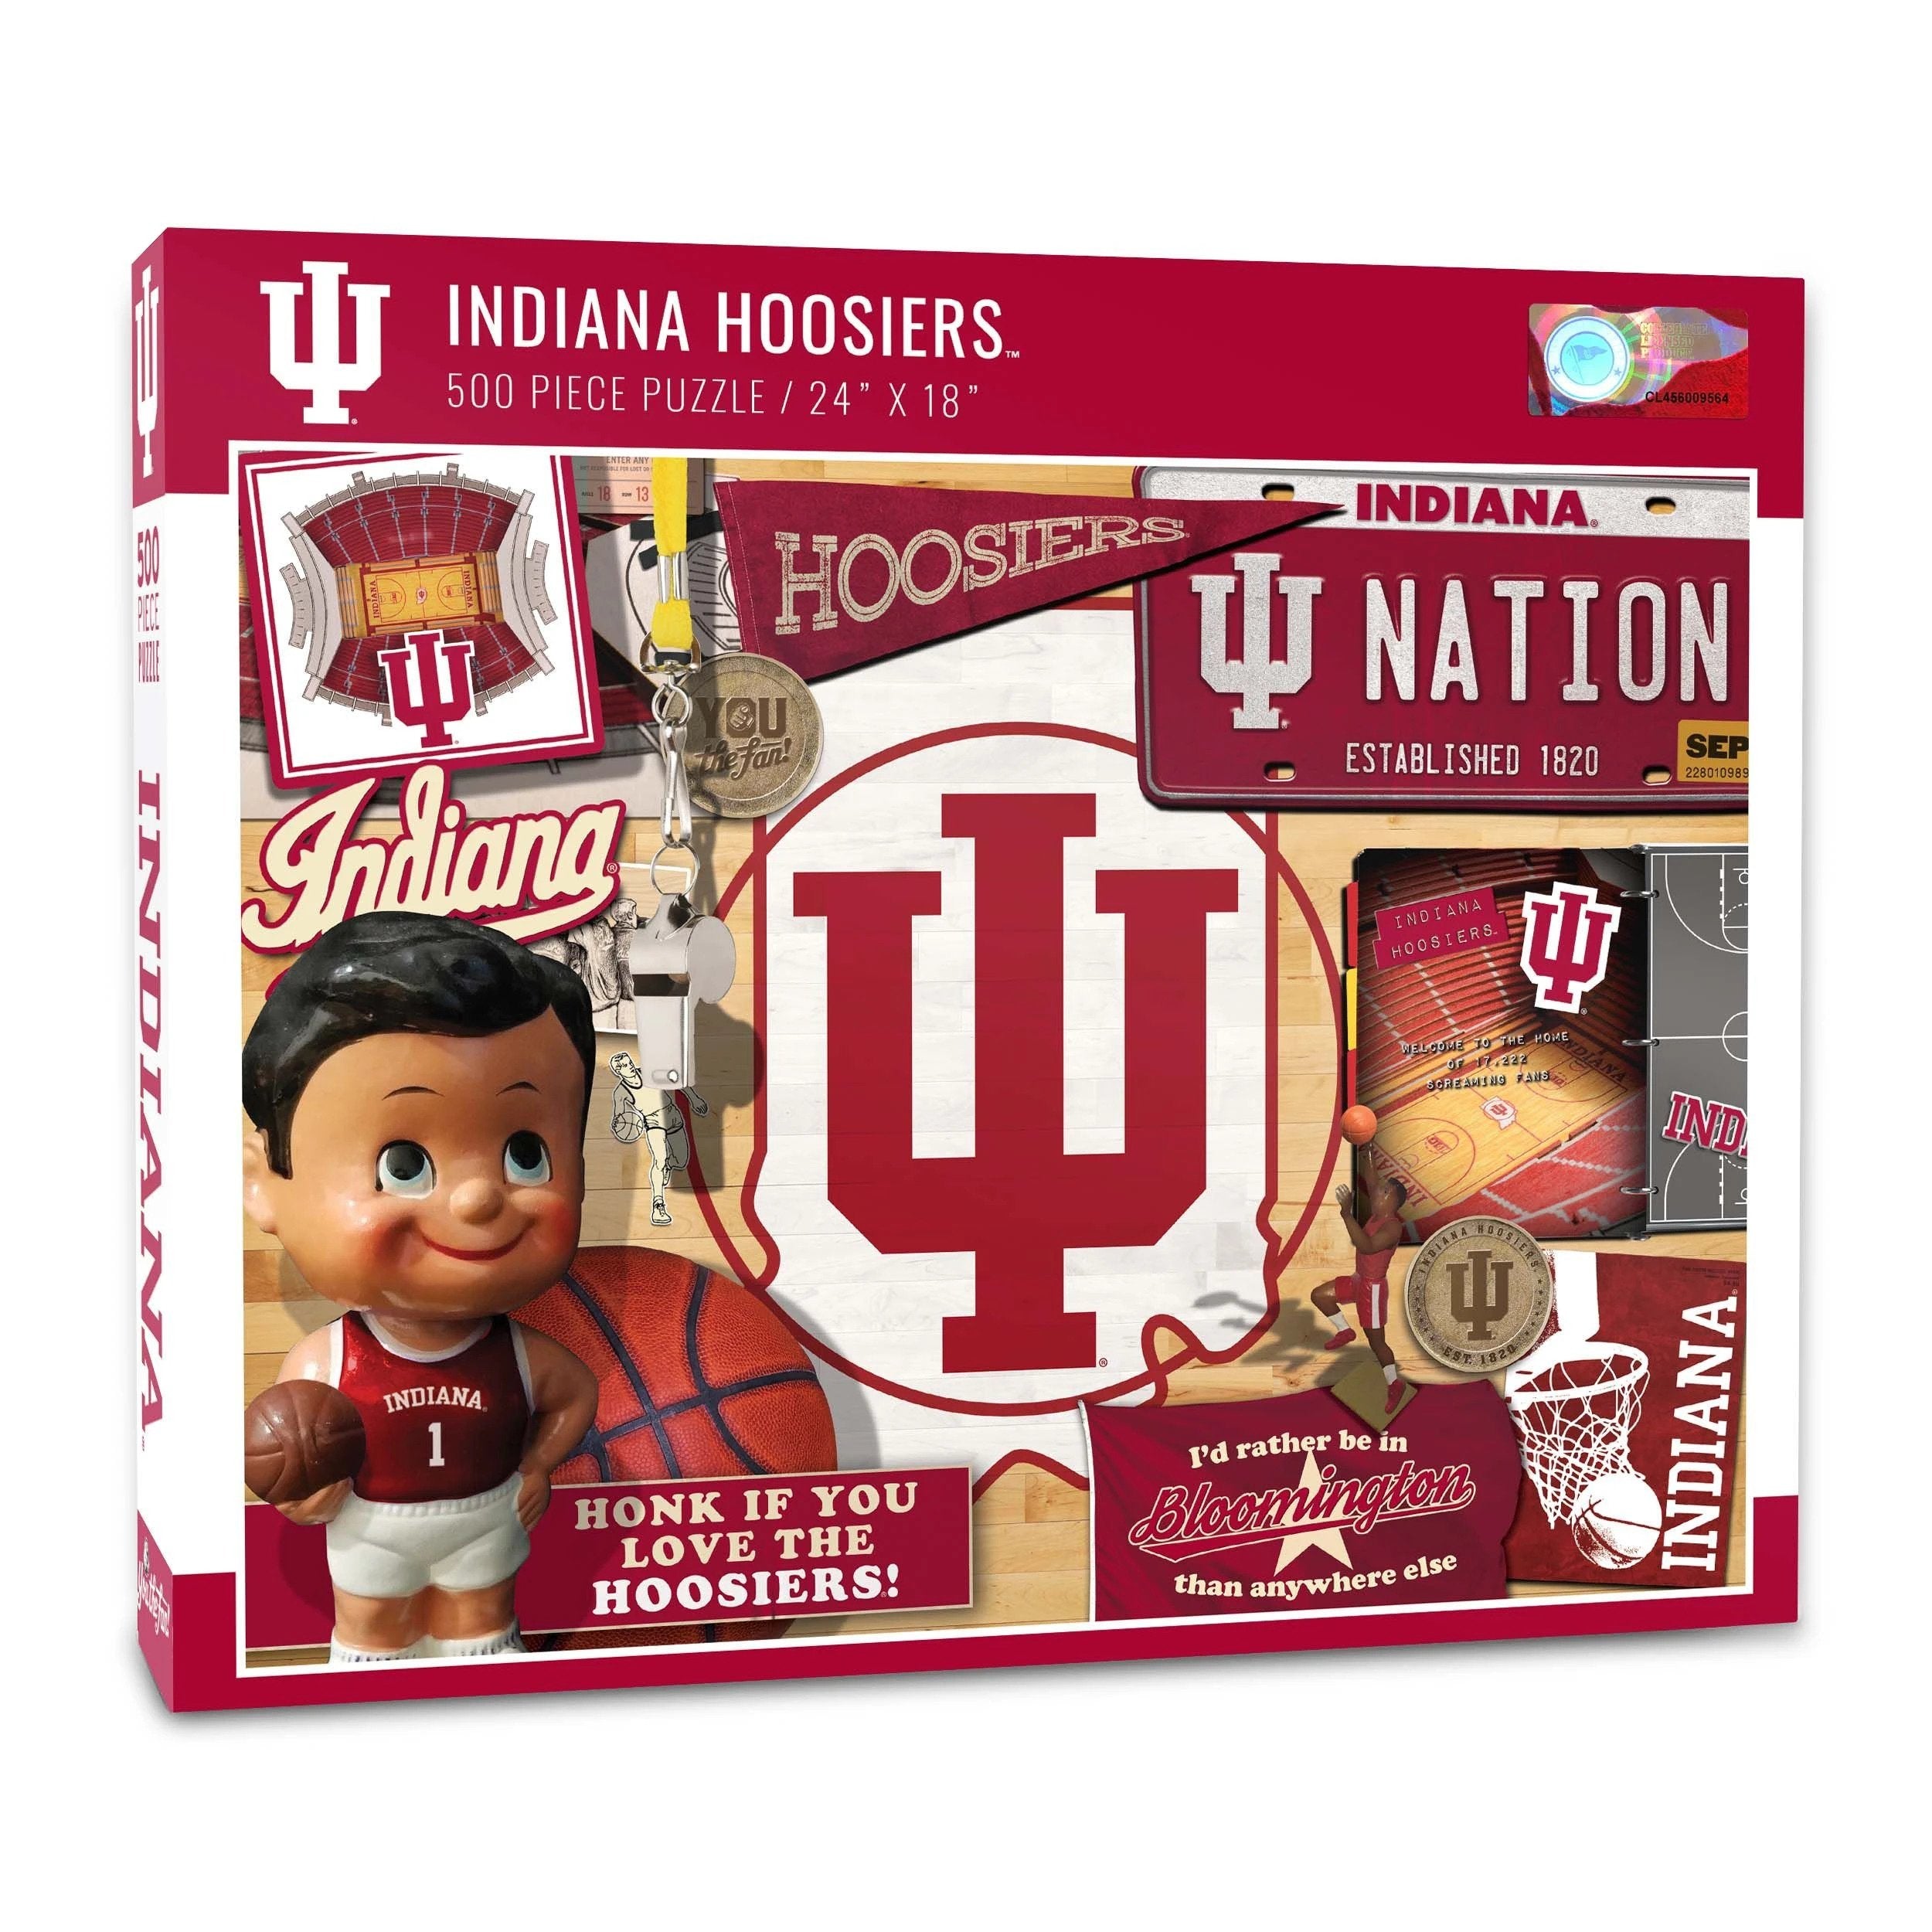 Indiana Hoosiers (500 pc puzzle)